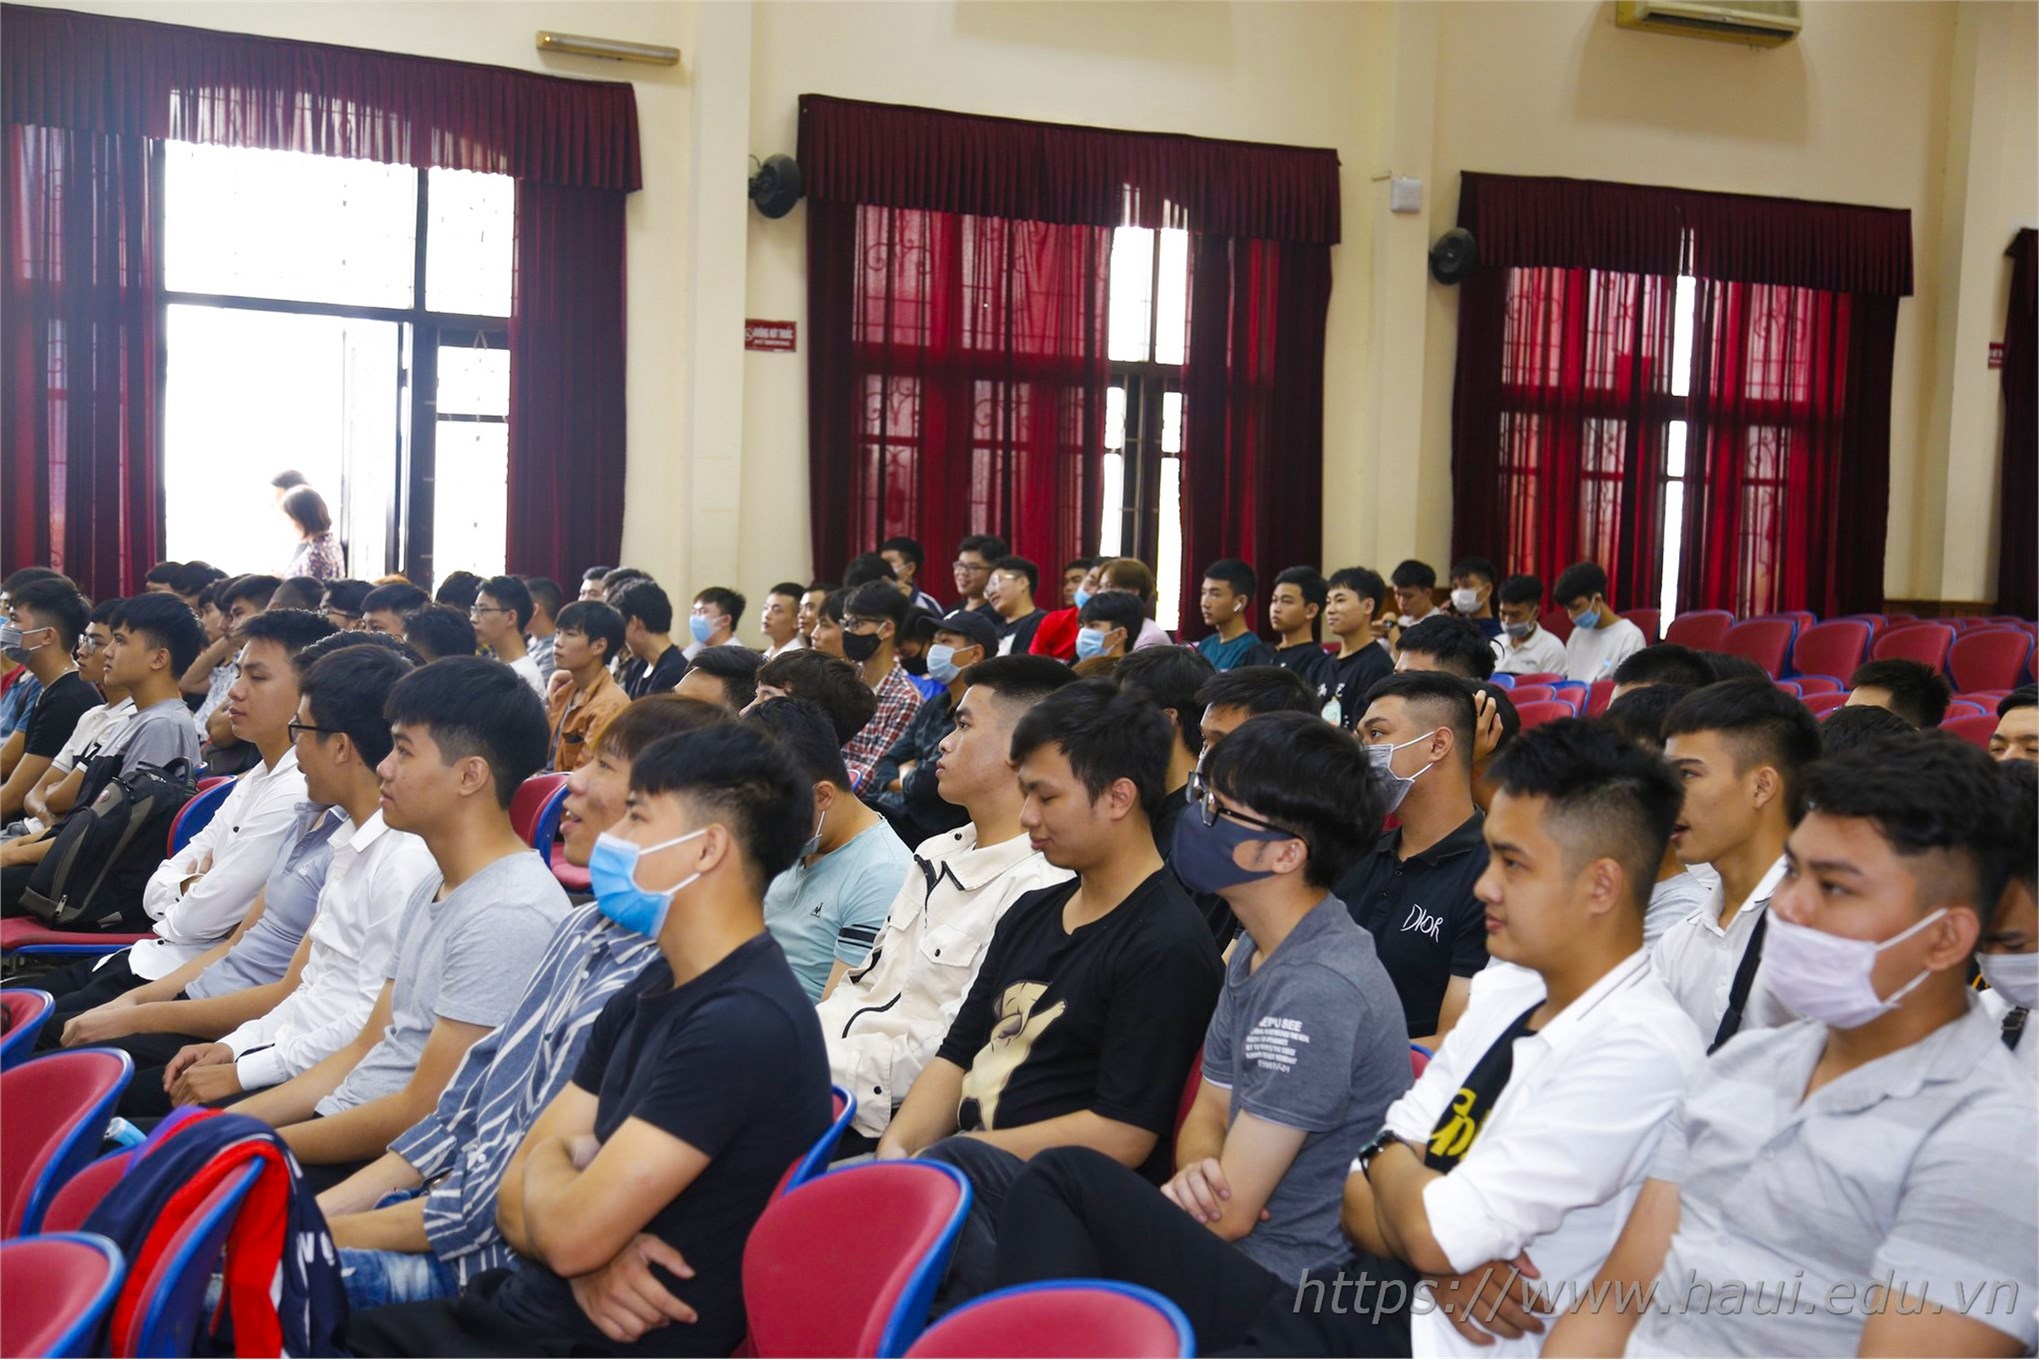 Nearly 300 college students intern at Samsung Electro-Mechanics Vietnam and M1 company